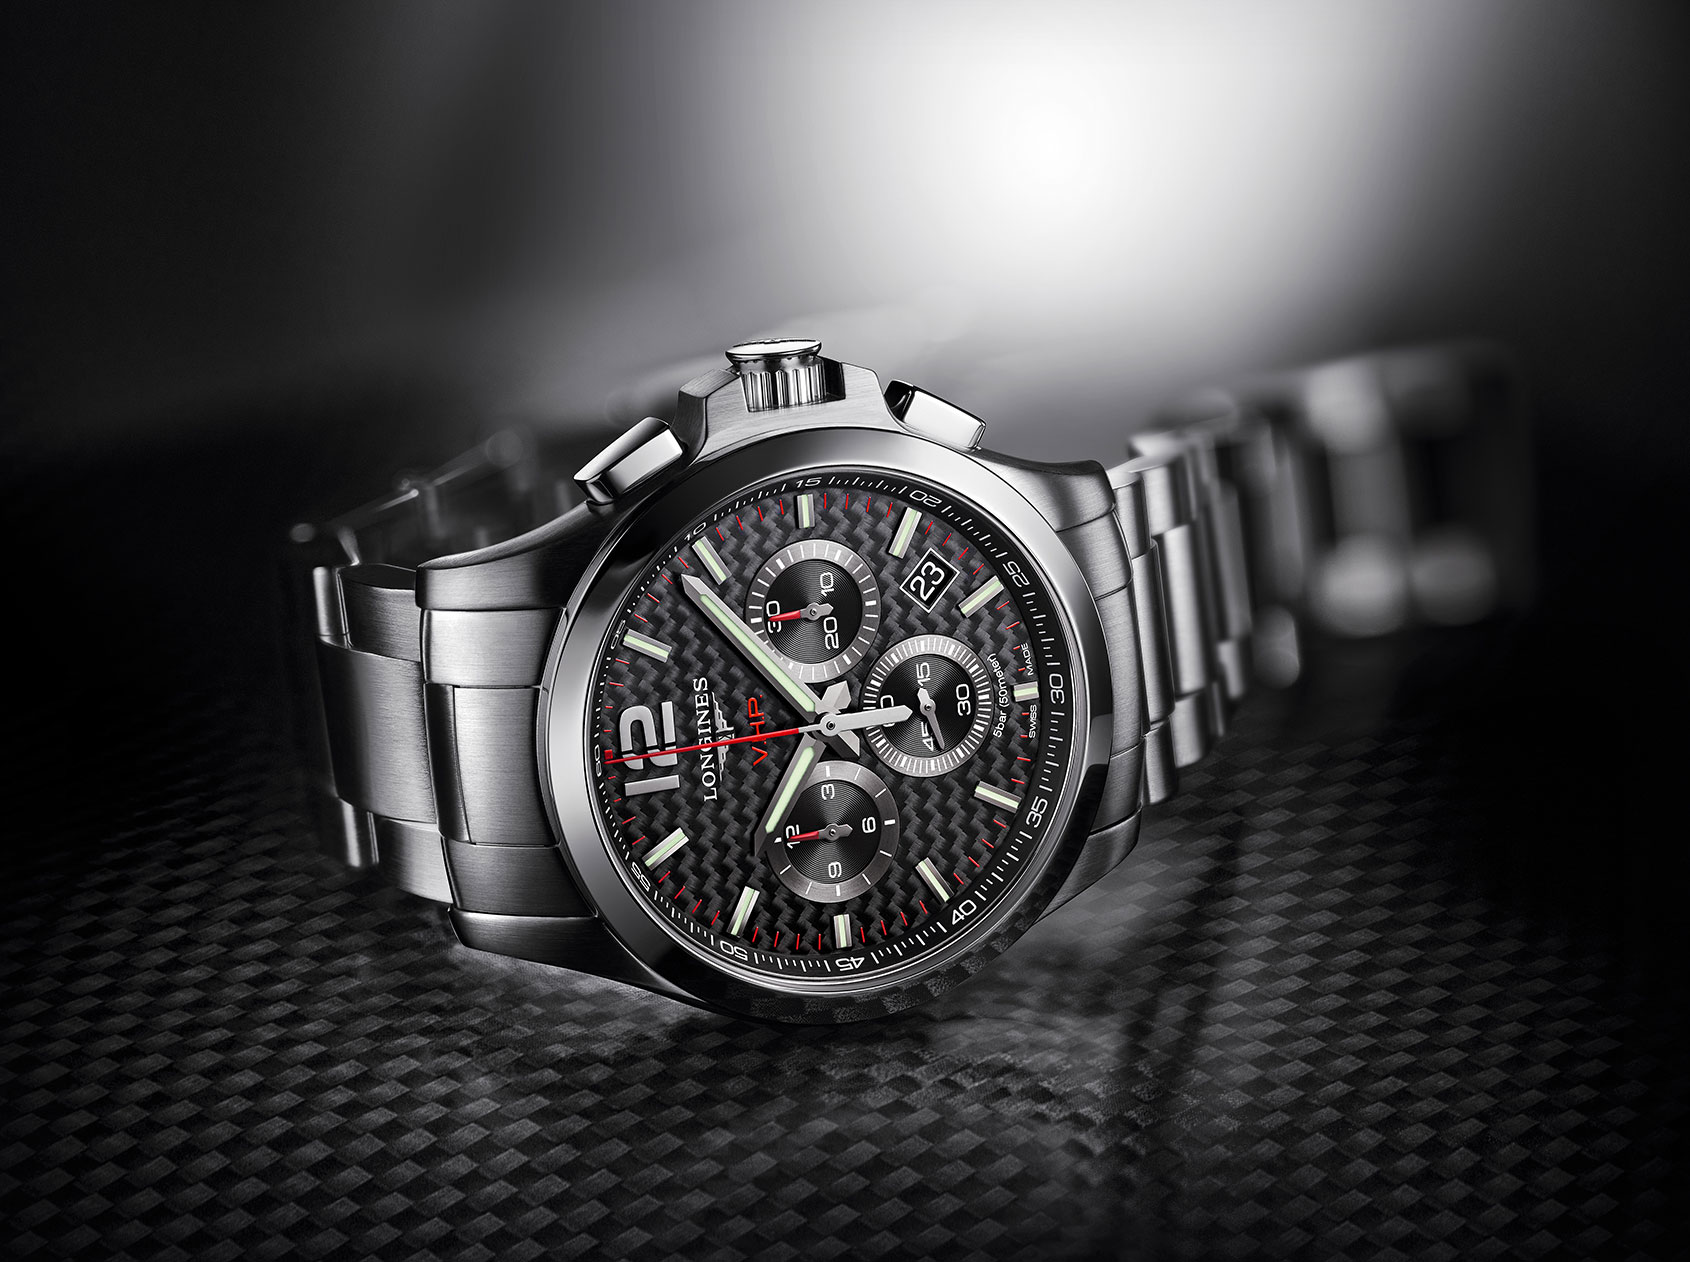 INTRODUCING The Longines Conquest V.H.P. Chronograph Time and Tide